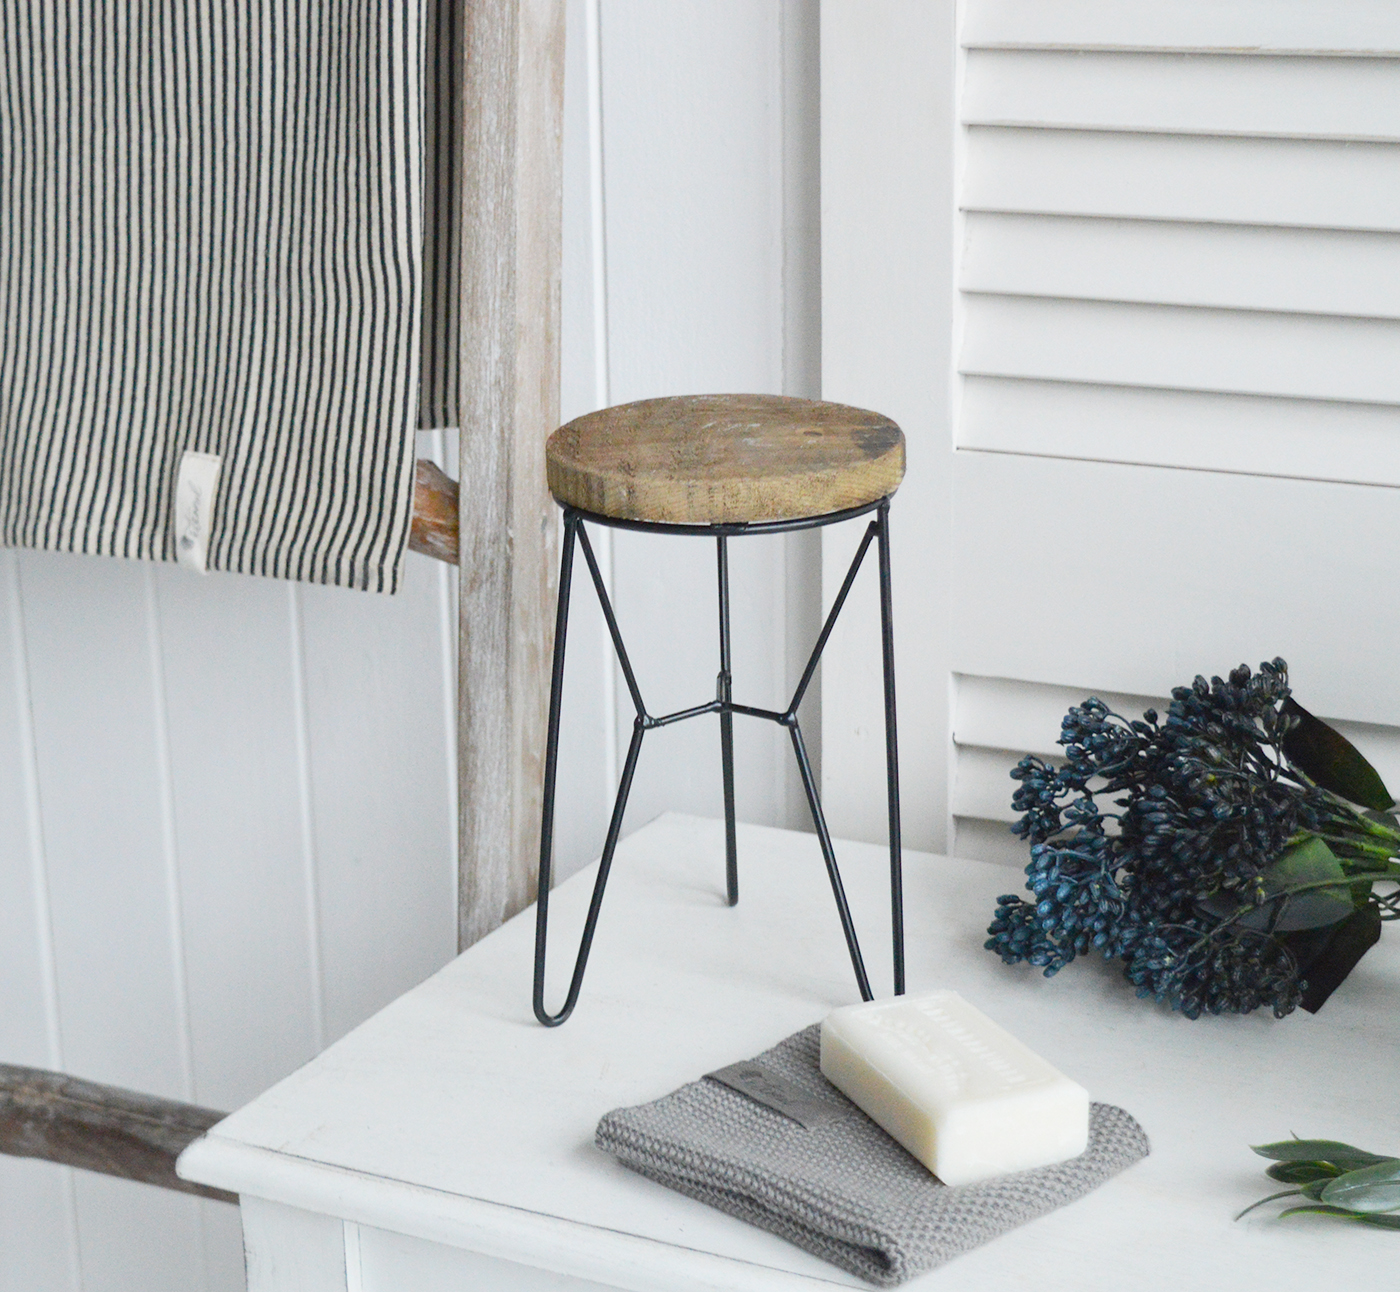 Peabody iron and rustic wooden decorative stool. Ideal for the living room or bathroom as a small side table or plant table in a New England styled home by the sea or in the country